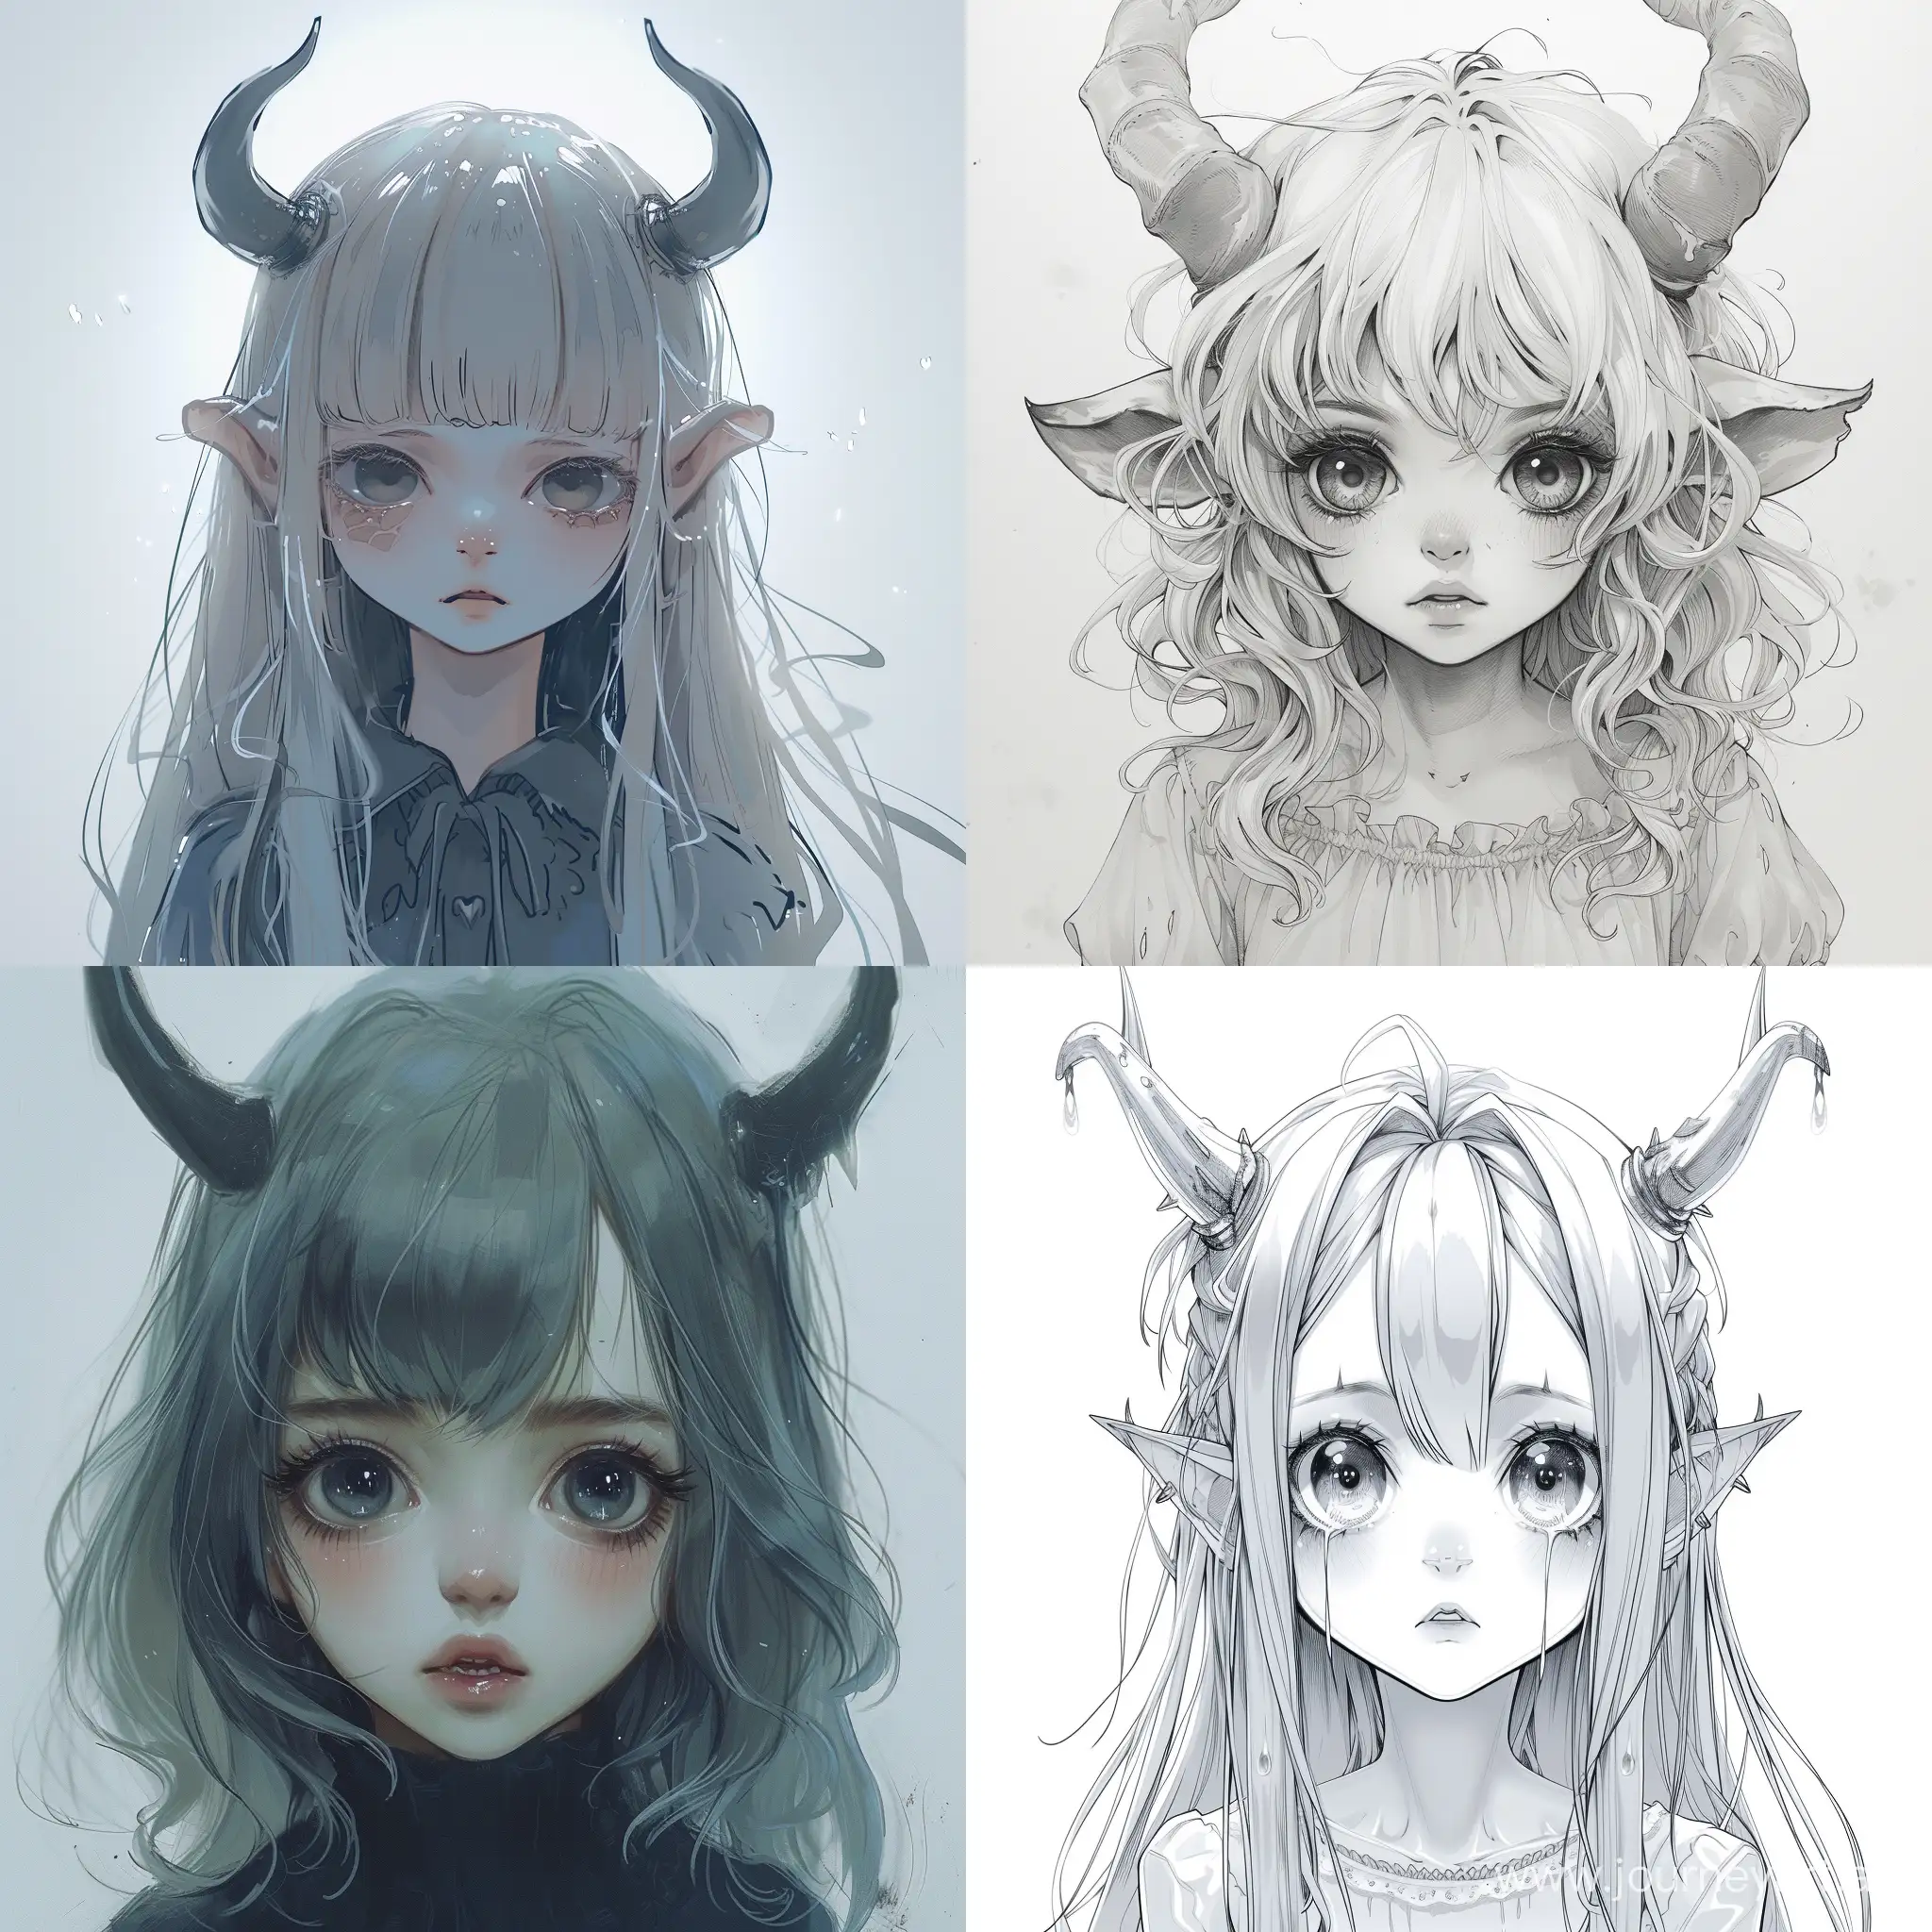 Mysterious-Anime-Girl-with-Unique-Horns-in-a-Gloomy-Setting